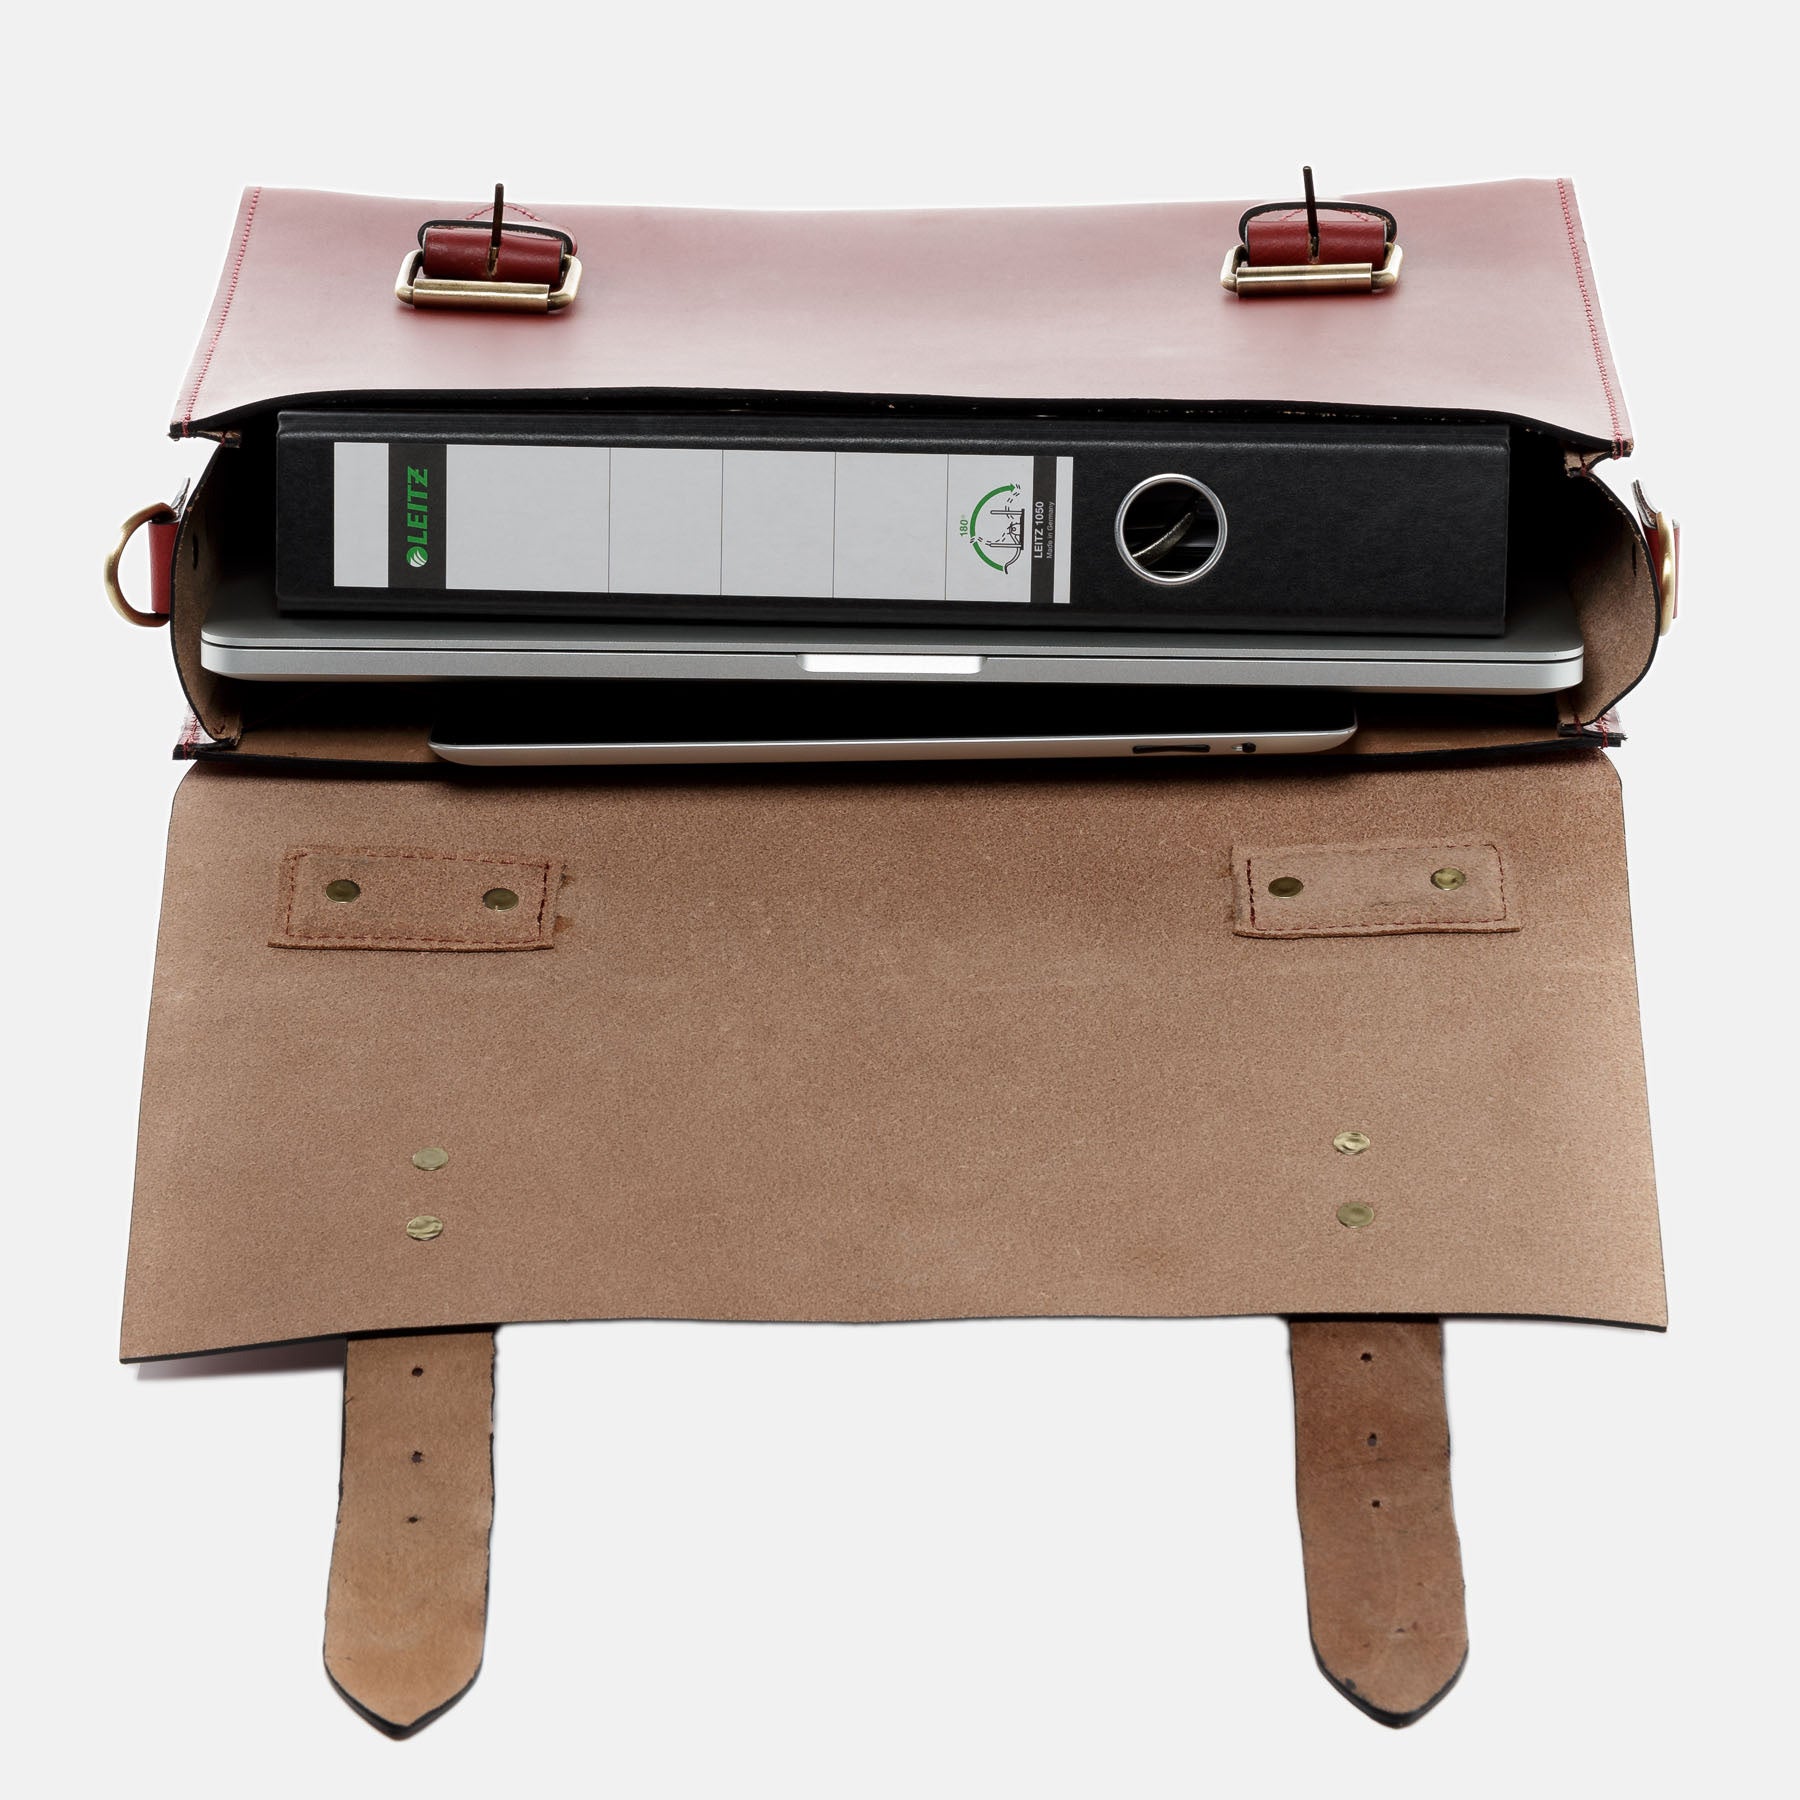 Briefcase BOSTON saddle leather red